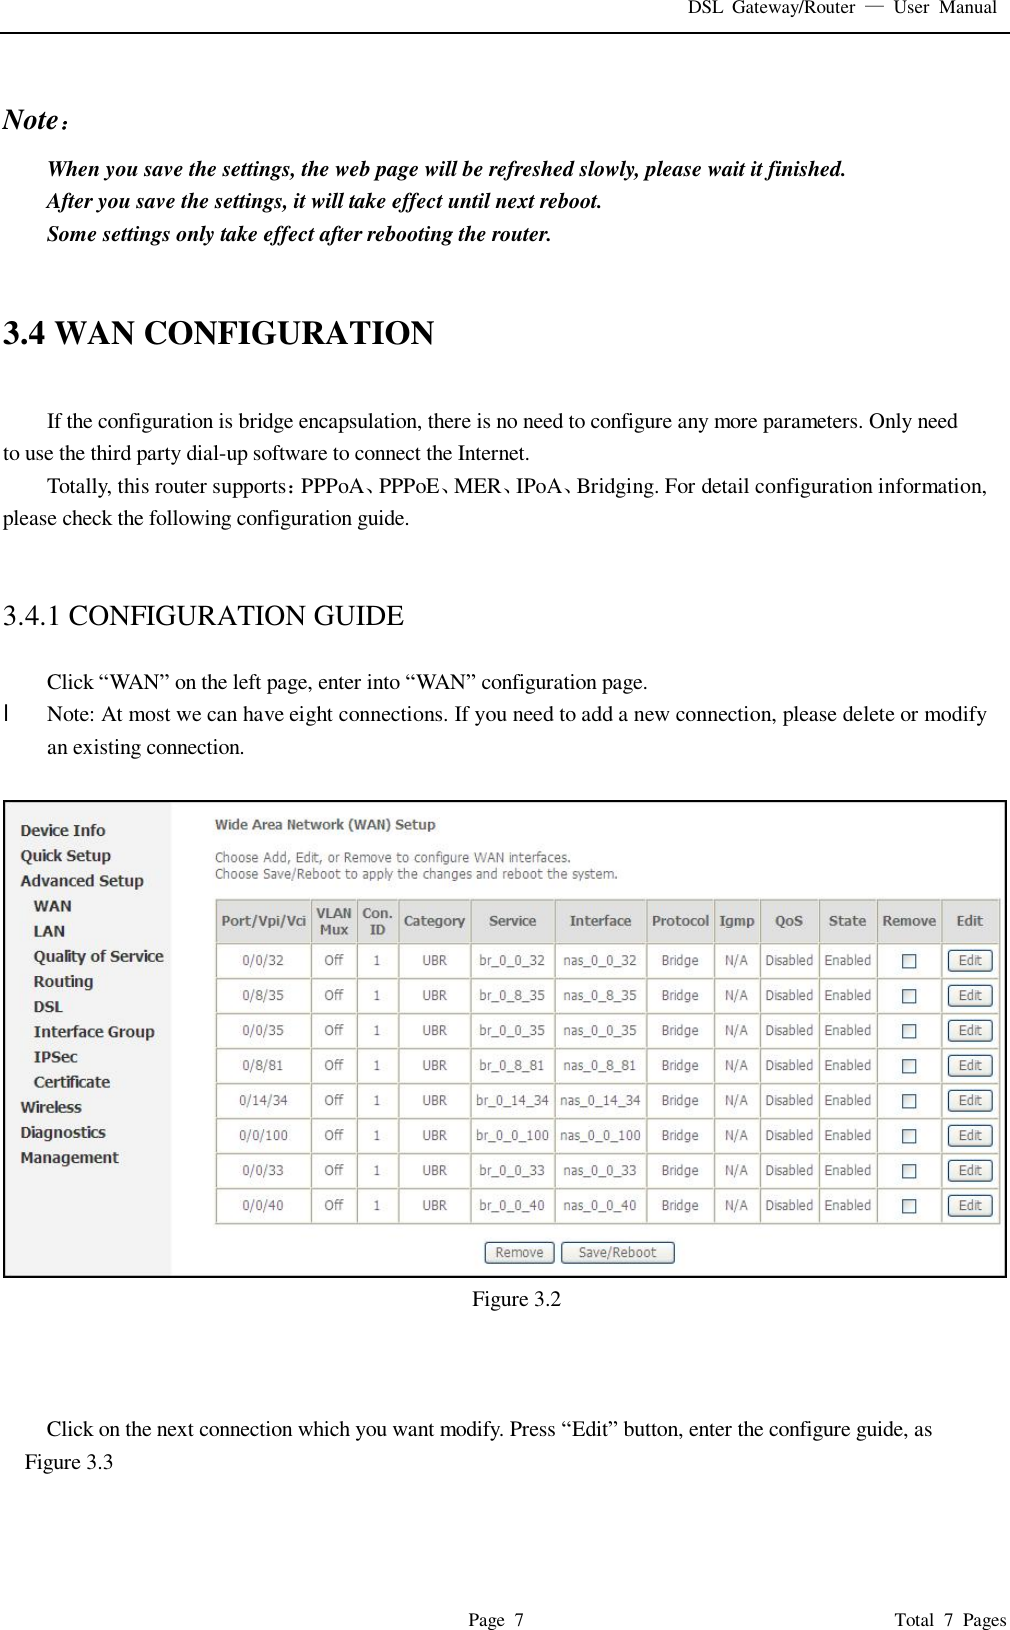 DSL Gateway/Router  — User Manual  Page 7                                       Total 7 Pages  Note： When you save the settings, the web page will be refreshed slowly, please wait it finished. After you save the settings, it will take effect until next reboot. Some settings only take effect after rebooting the router.   3.4 WAN CONFIGURATION  If the configuration is bridge encapsulation, there is no need to configure any more parameters. Only need to use the third party dial-up software to connect the Internet.  Totally, this router supports：PPPoA、PPPoE、MER、IPoA、Bridging. For detail configuration information, please check the following configuration guide.   3.4.1 CONFIGURATION GUIDE  Click “WAN” on the left page, enter into “WAN” configuration page. l  Note: At most we can have eight connections. If you need to add a new connection, please delete or modify an existing connection.    Figure 3.2    Click on the next connection which you want modify. Press “Edit” button, enter the configure guide, as Figure 3.3 